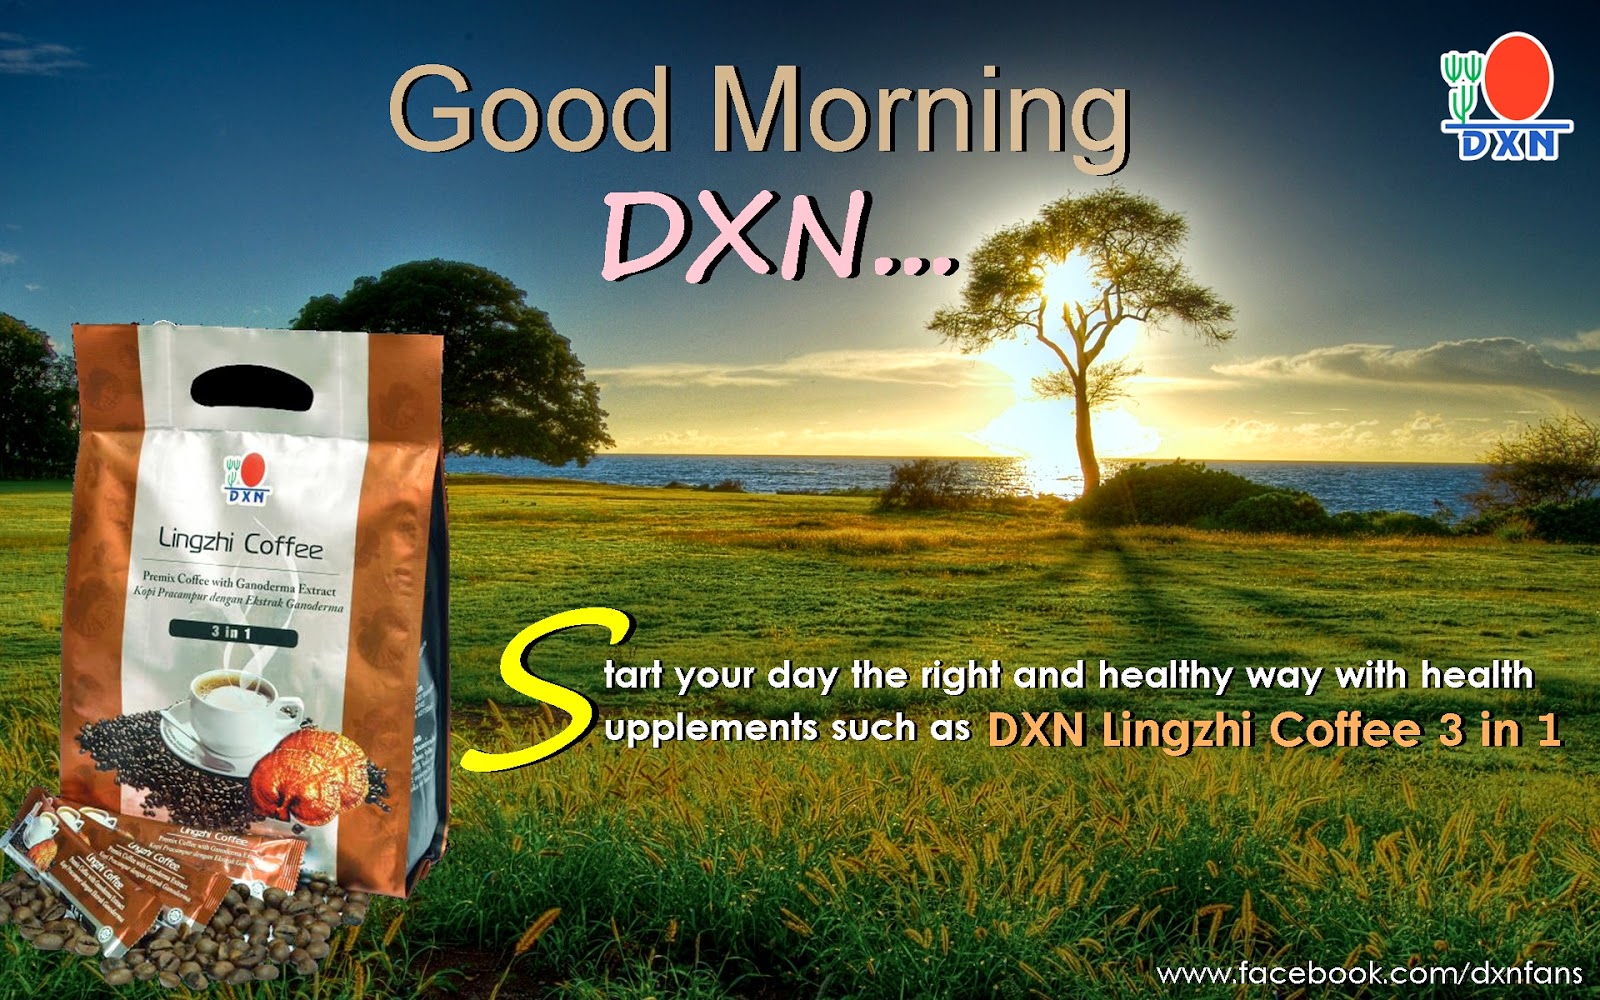 Welcome to the DXN Fans Blog: Good Morning DXN!